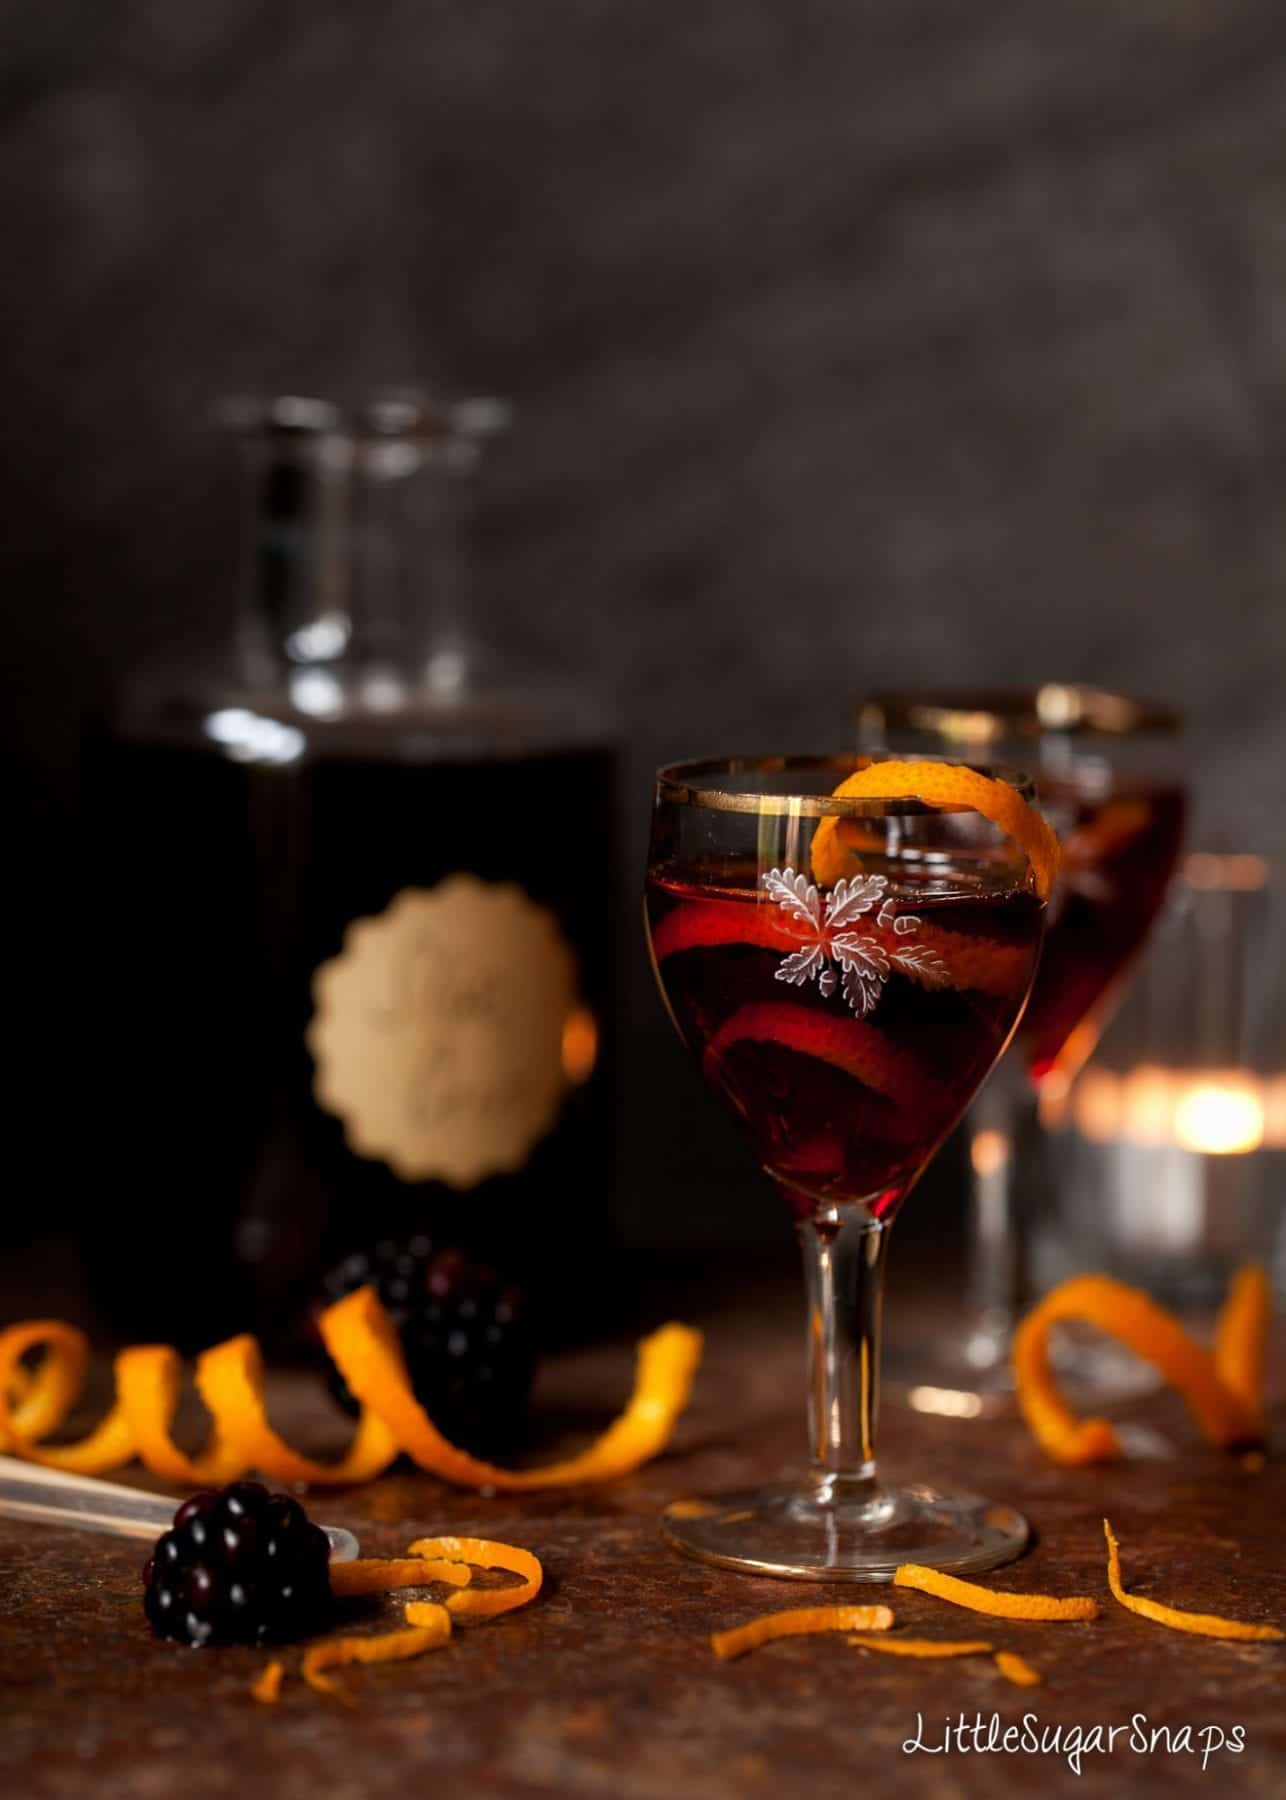 Small glasses of Sloe gin with orange peel spiral and blackberries